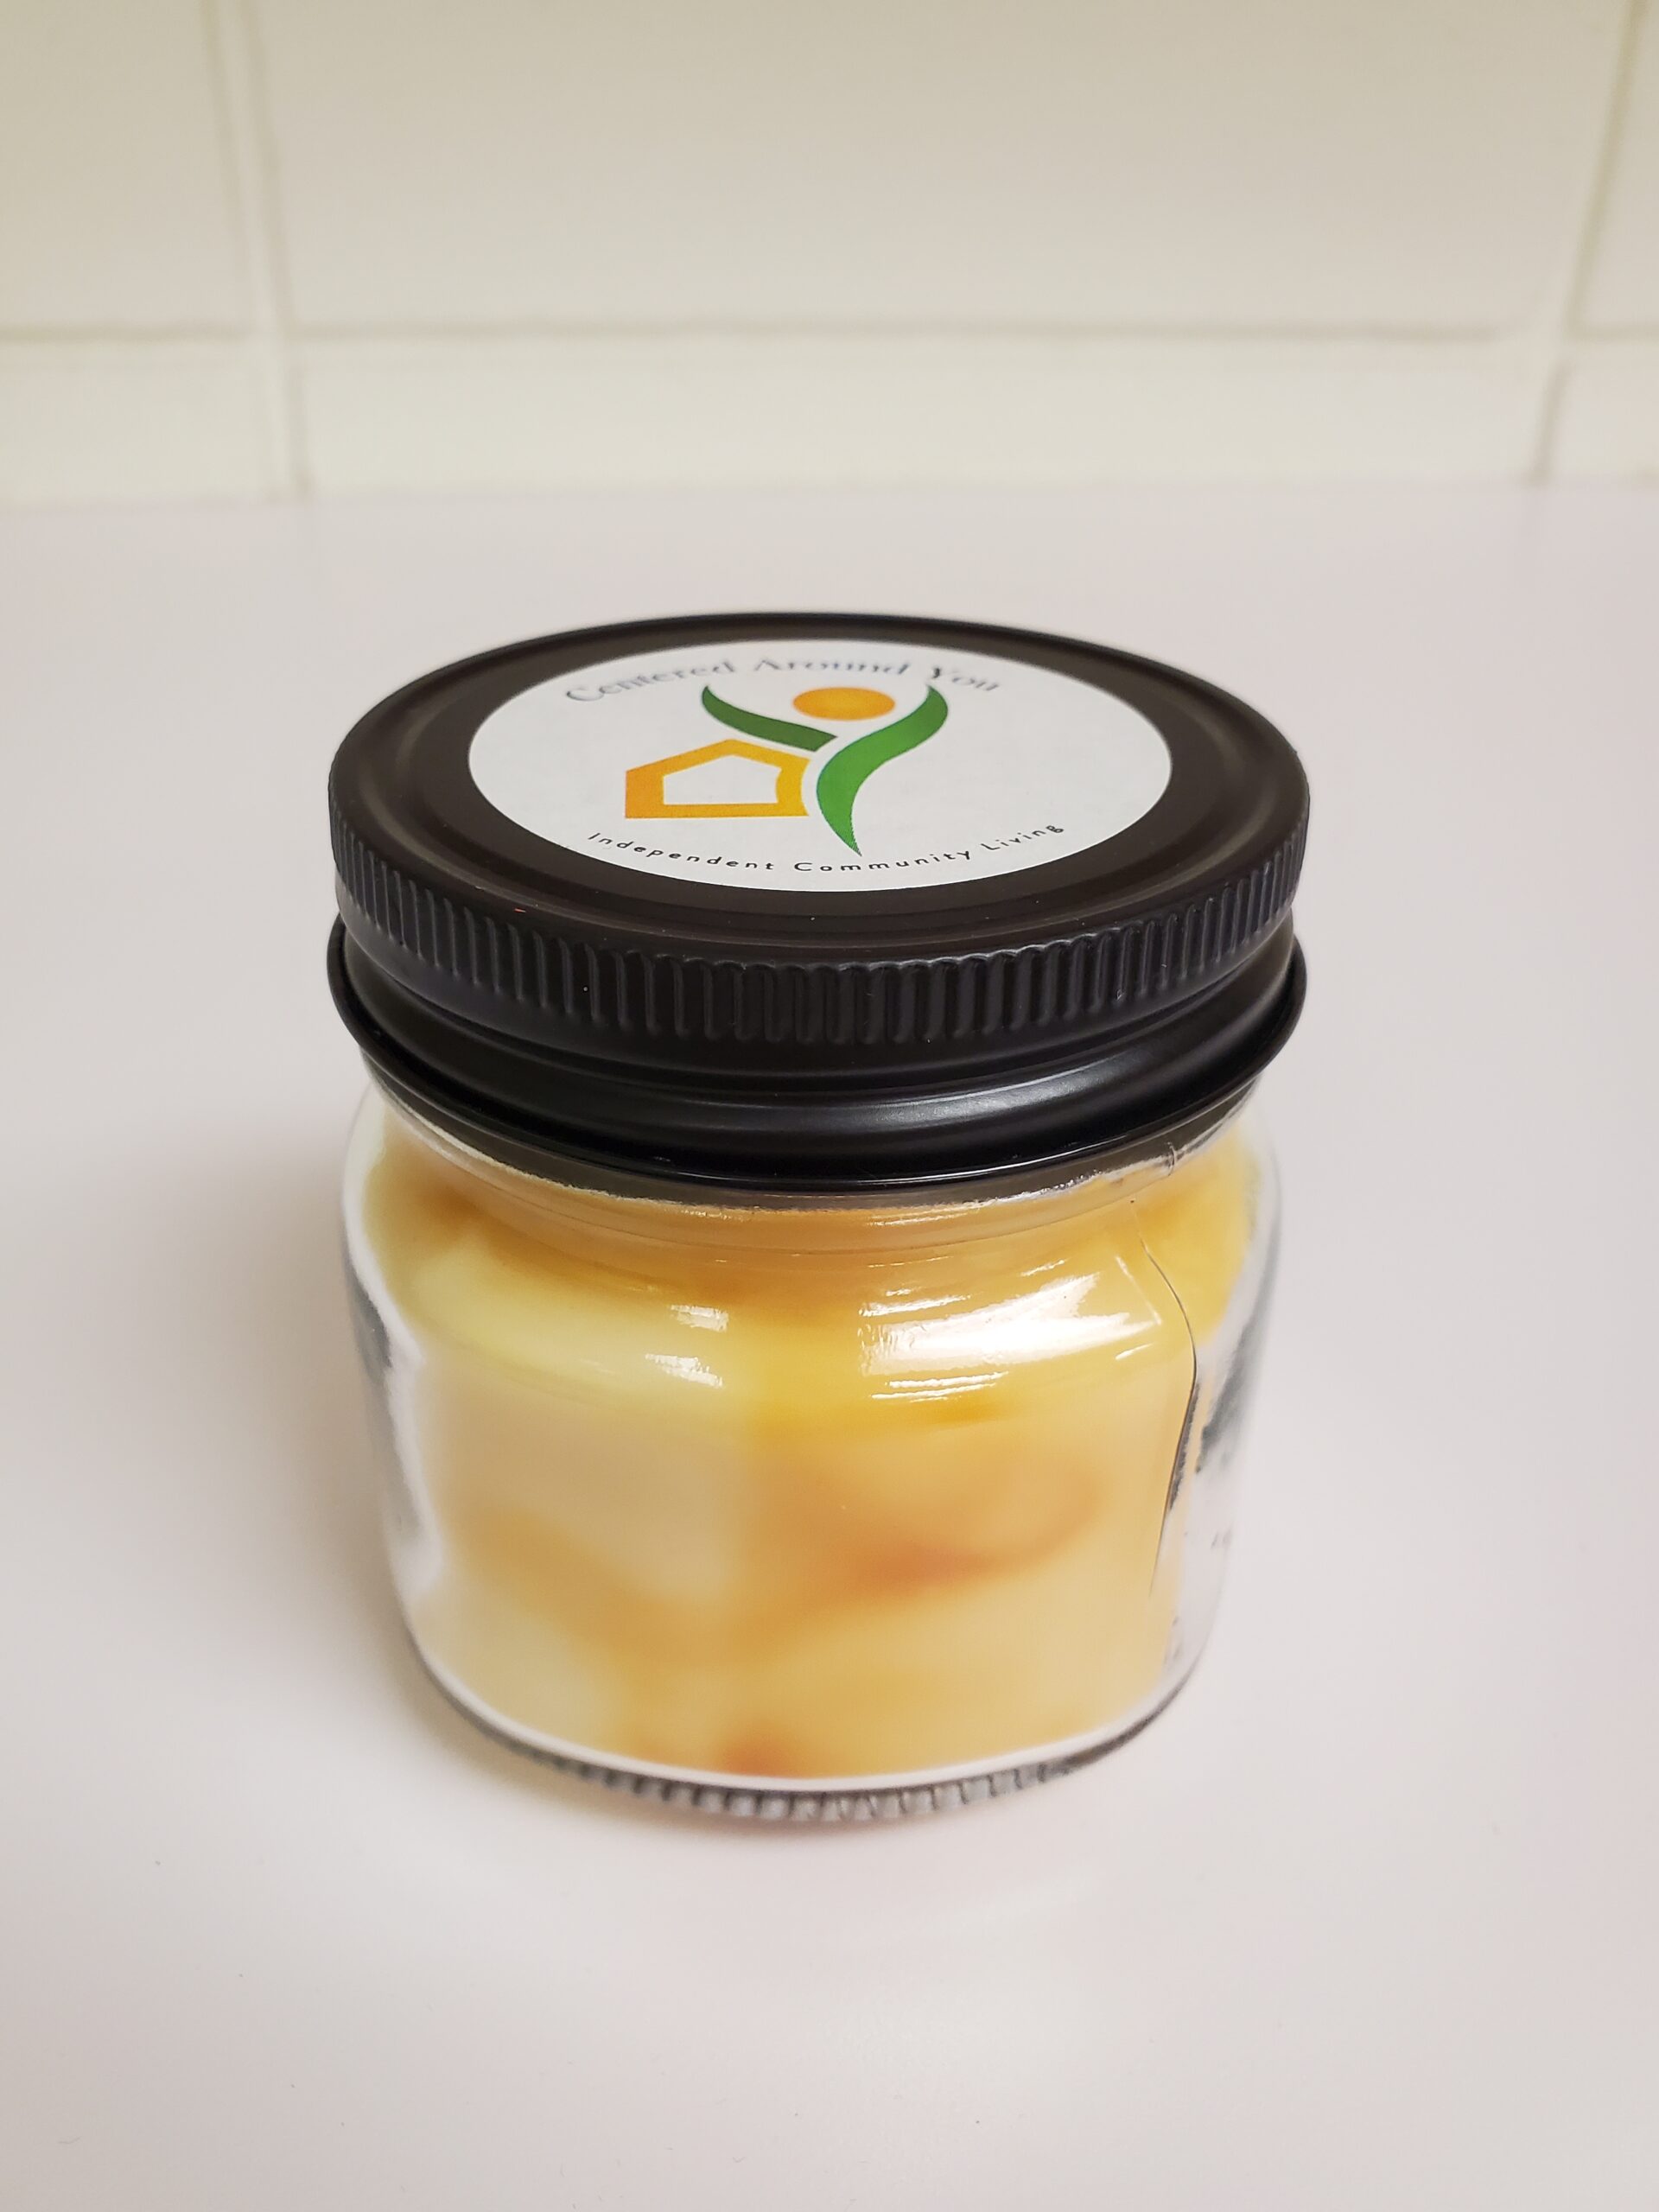 Soy Wax Candle from Coyer Candle Co. - 8 oz. choose green or orange swirled wax color for each scent